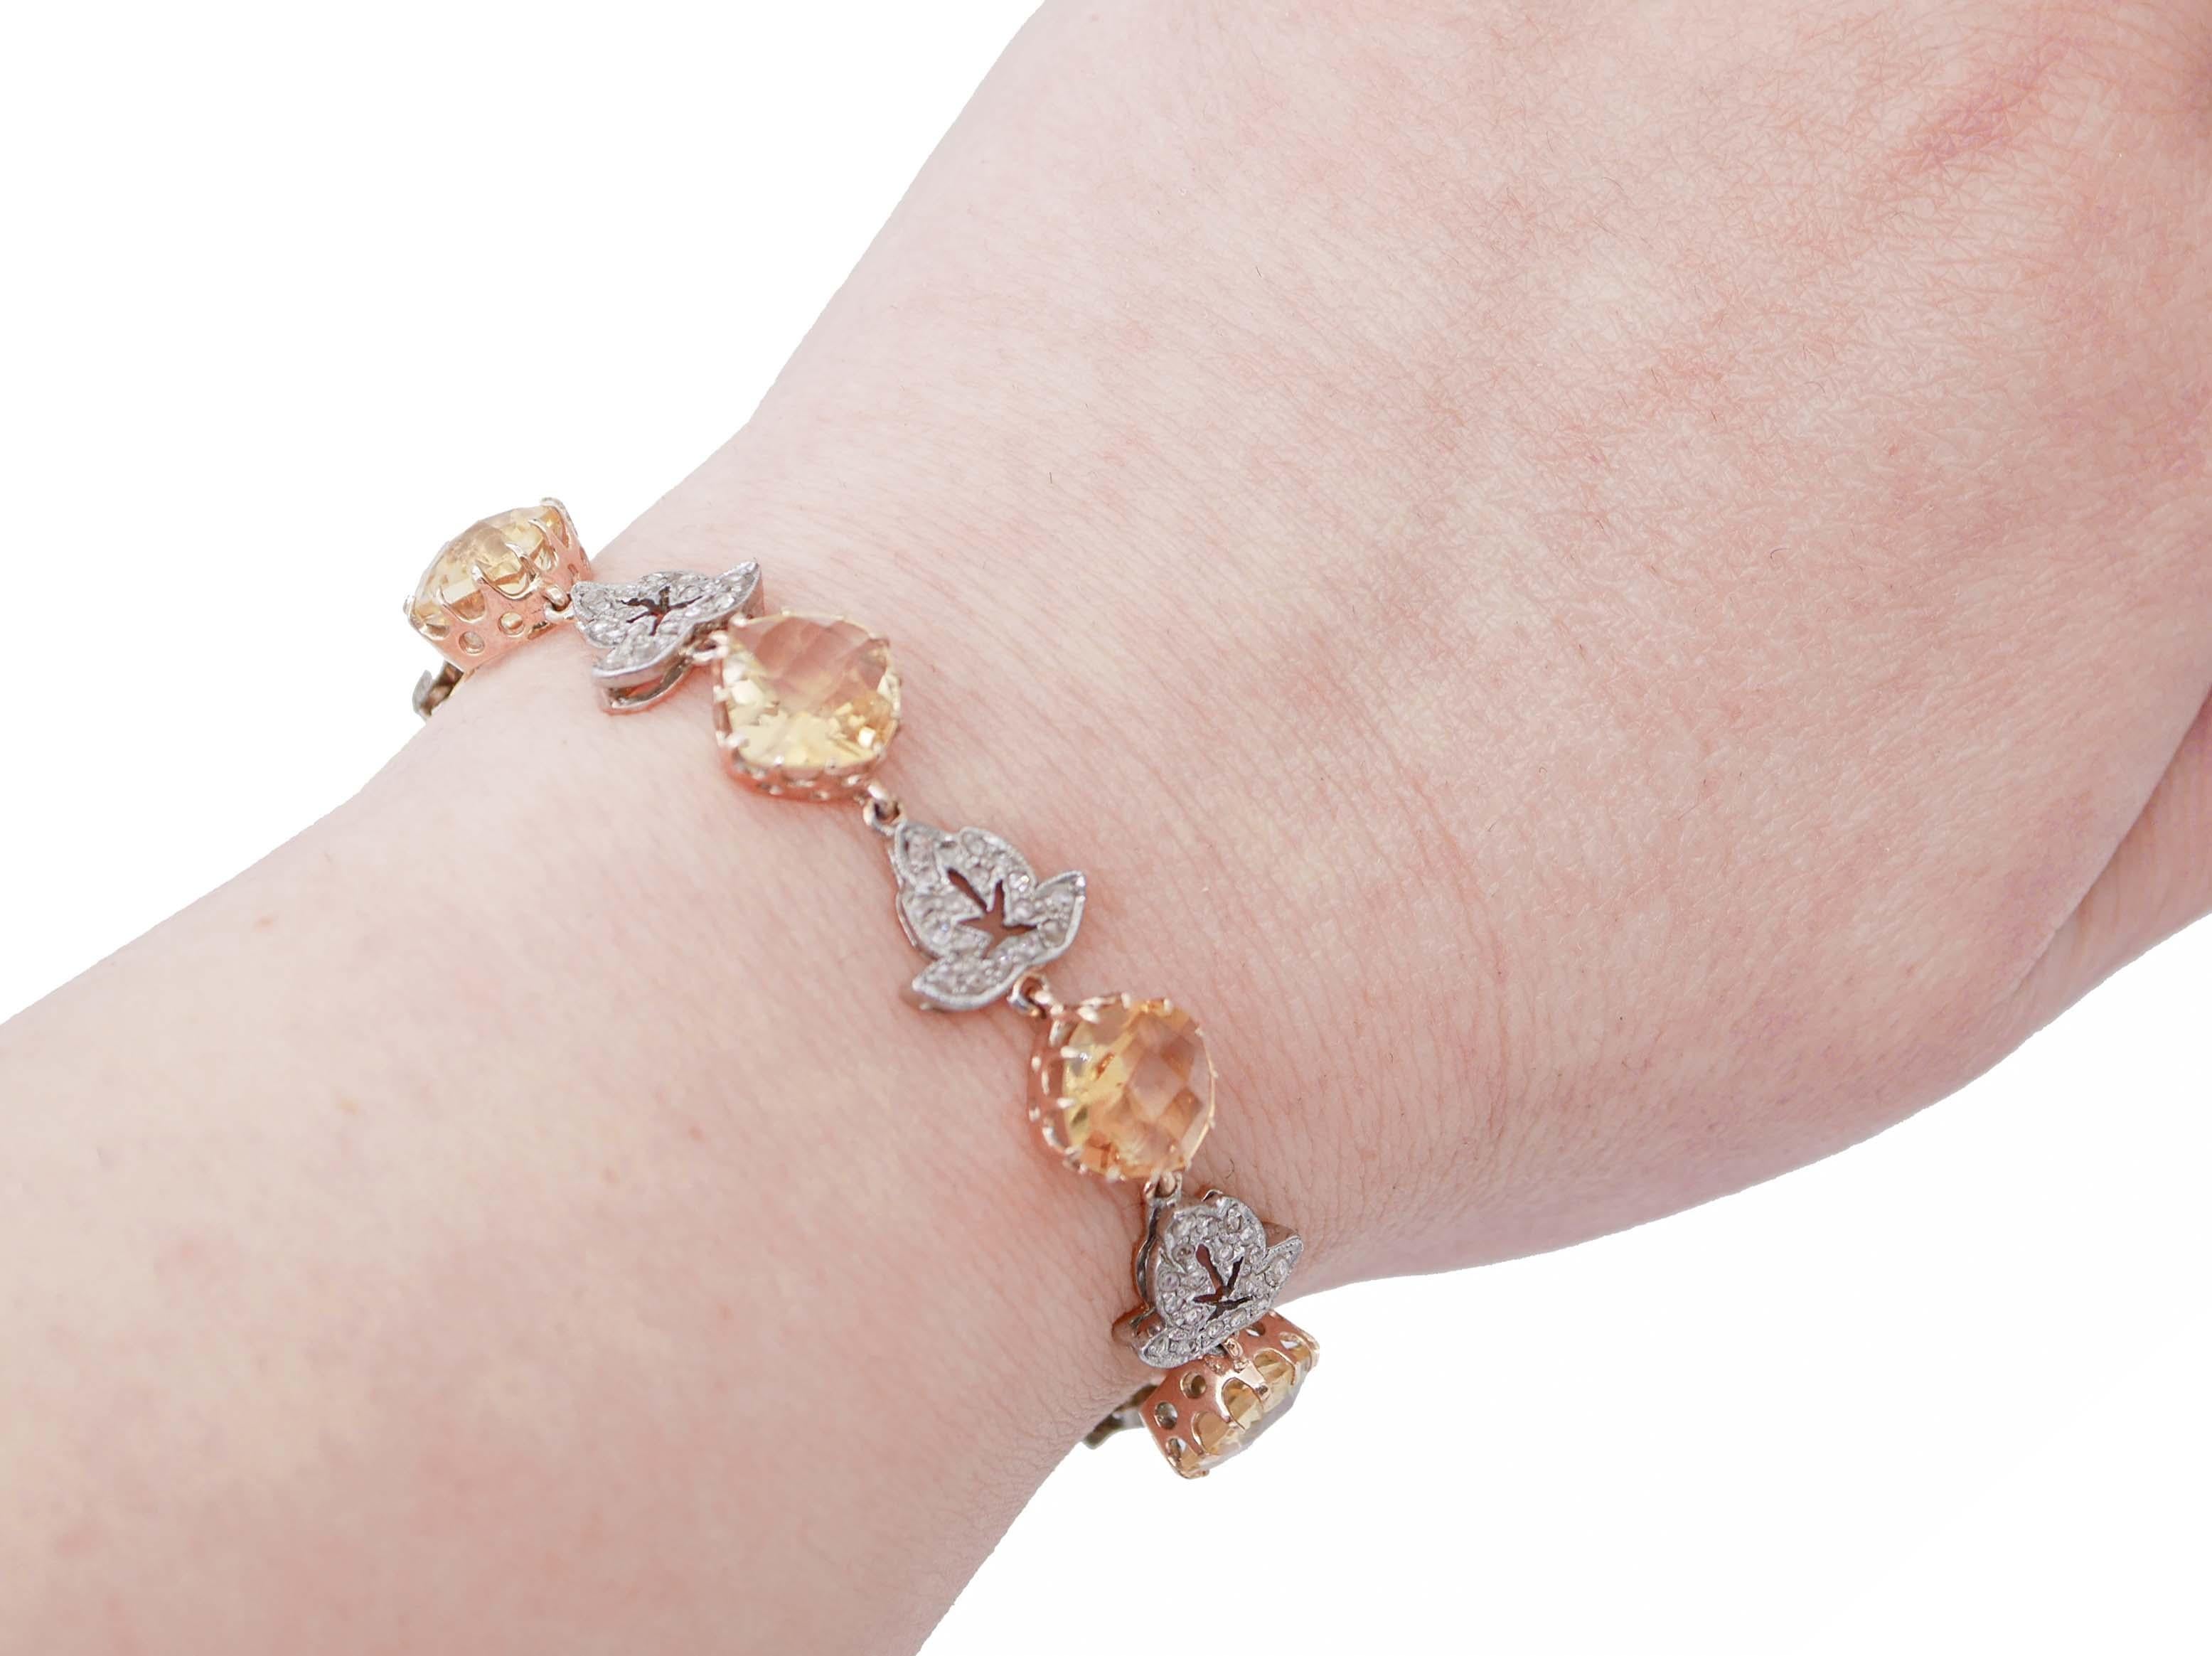 Diamonds, Yellow Topaz, Rose Gold and Silver Bracelet In Good Condition For Sale In Marcianise, Marcianise (CE)